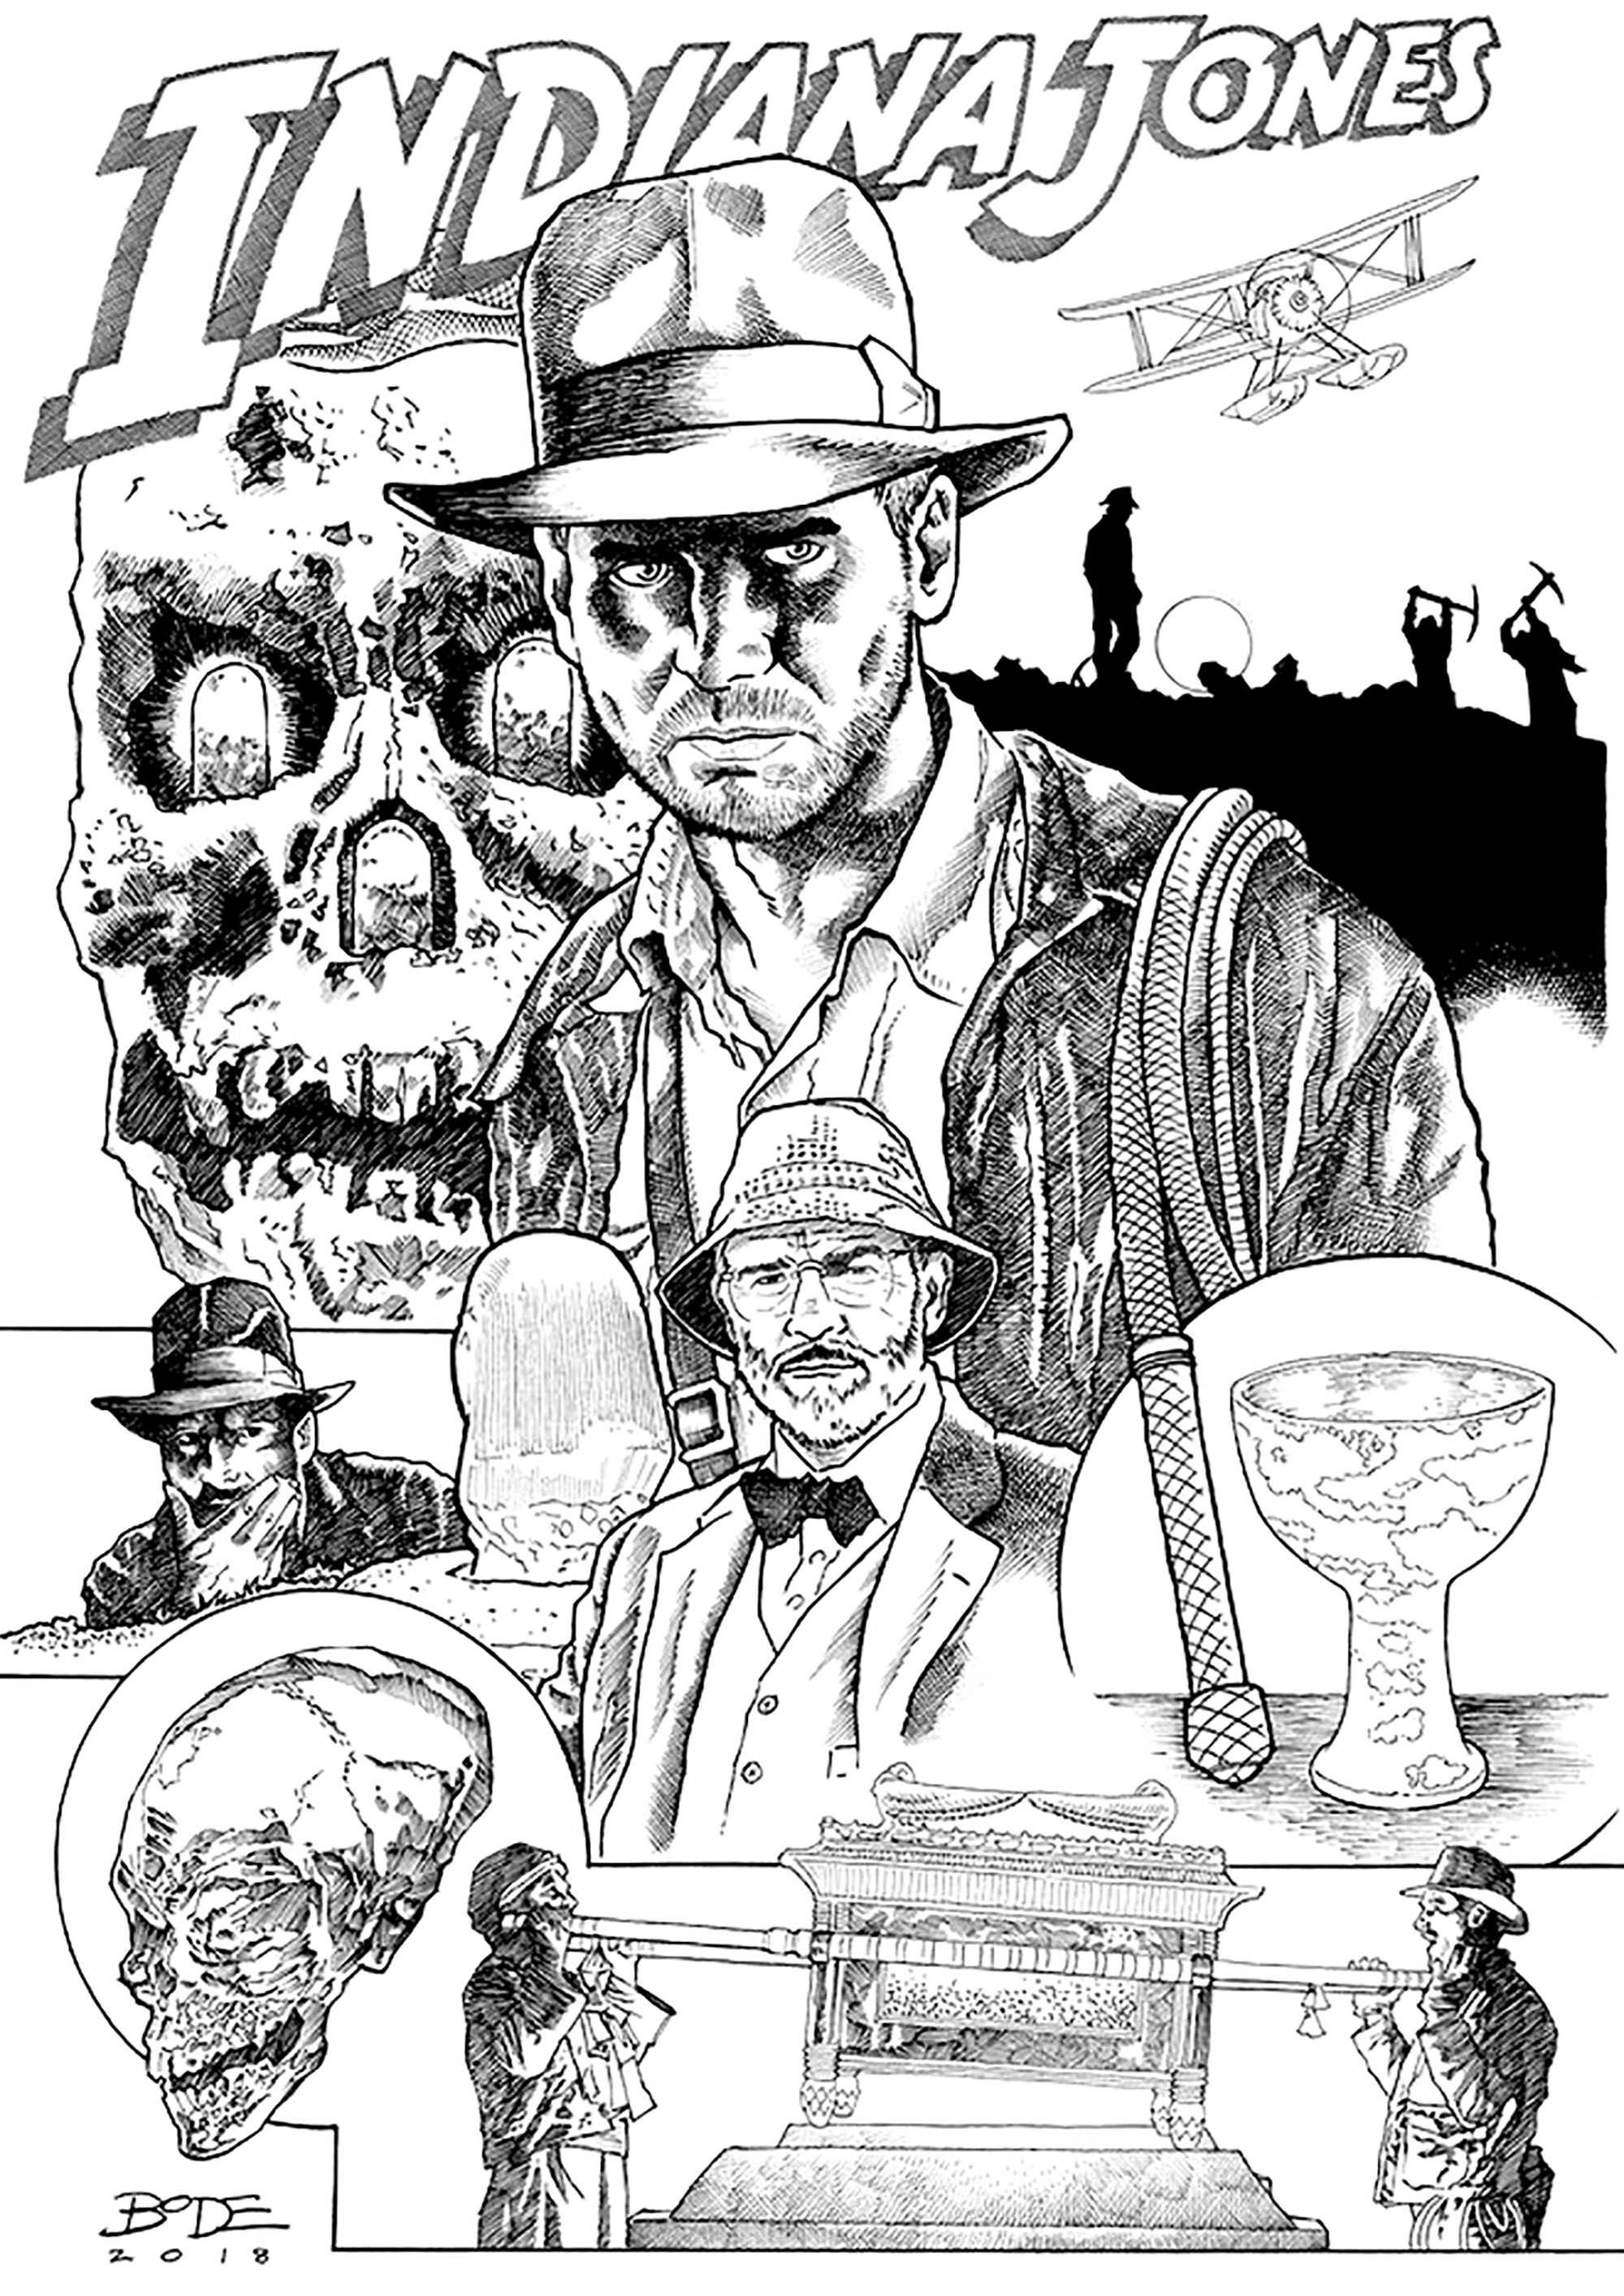 Drawing inspired by the adventures of Indiana Jones. Color this magnificent drawing inspired by the various Indiana Jones films.Created by Ryan Bodenheim, Comics illustrator, Artist : Ryan Bodenheim